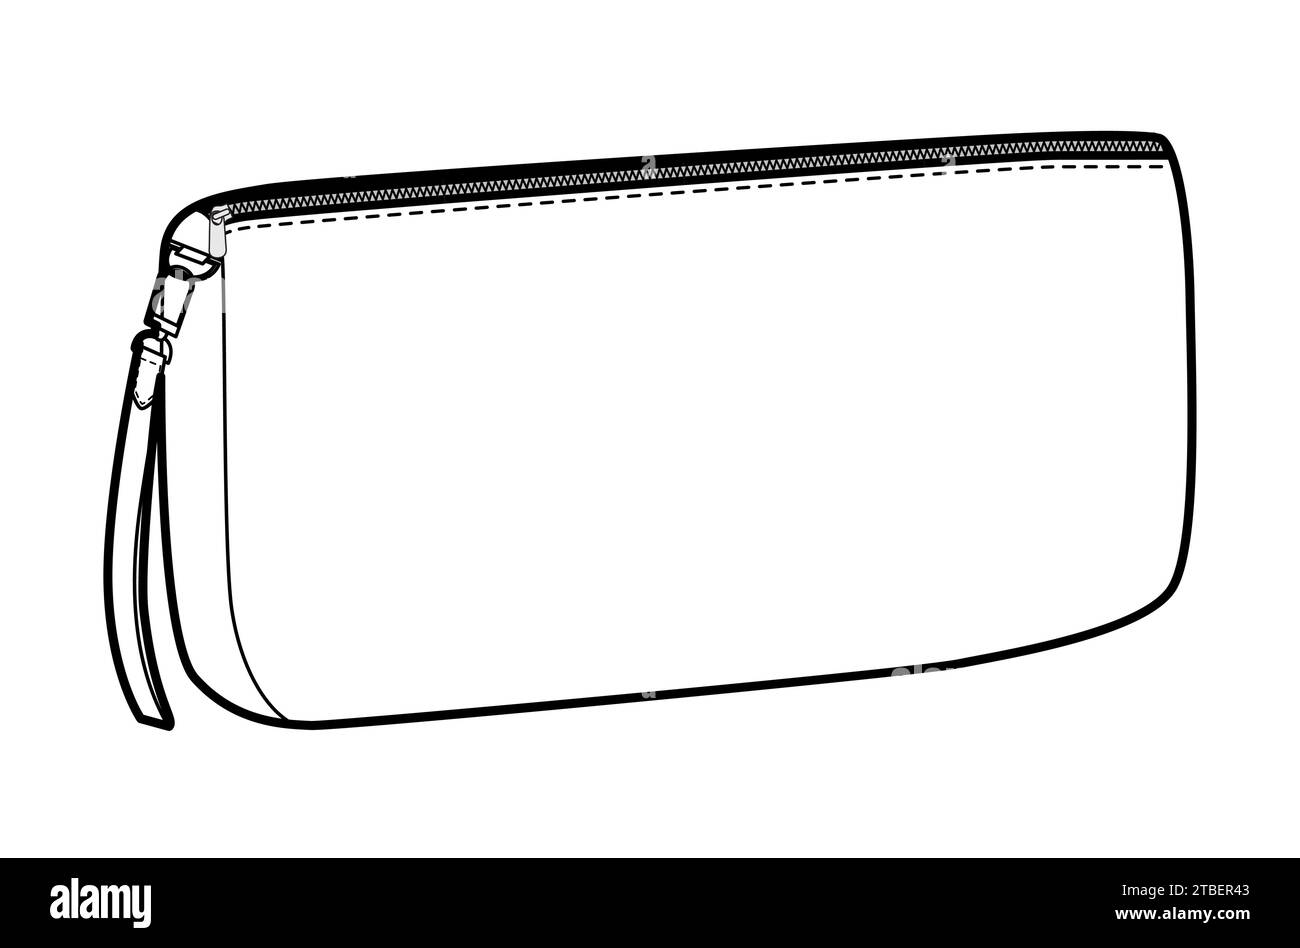 Pochette clutch silhouette bag. Fashion accessory technical illustration. Vector satchel front 3-4 view for Men, women, unisex style, flat handbag CAD mockup sketch outline isolated Stock Vector